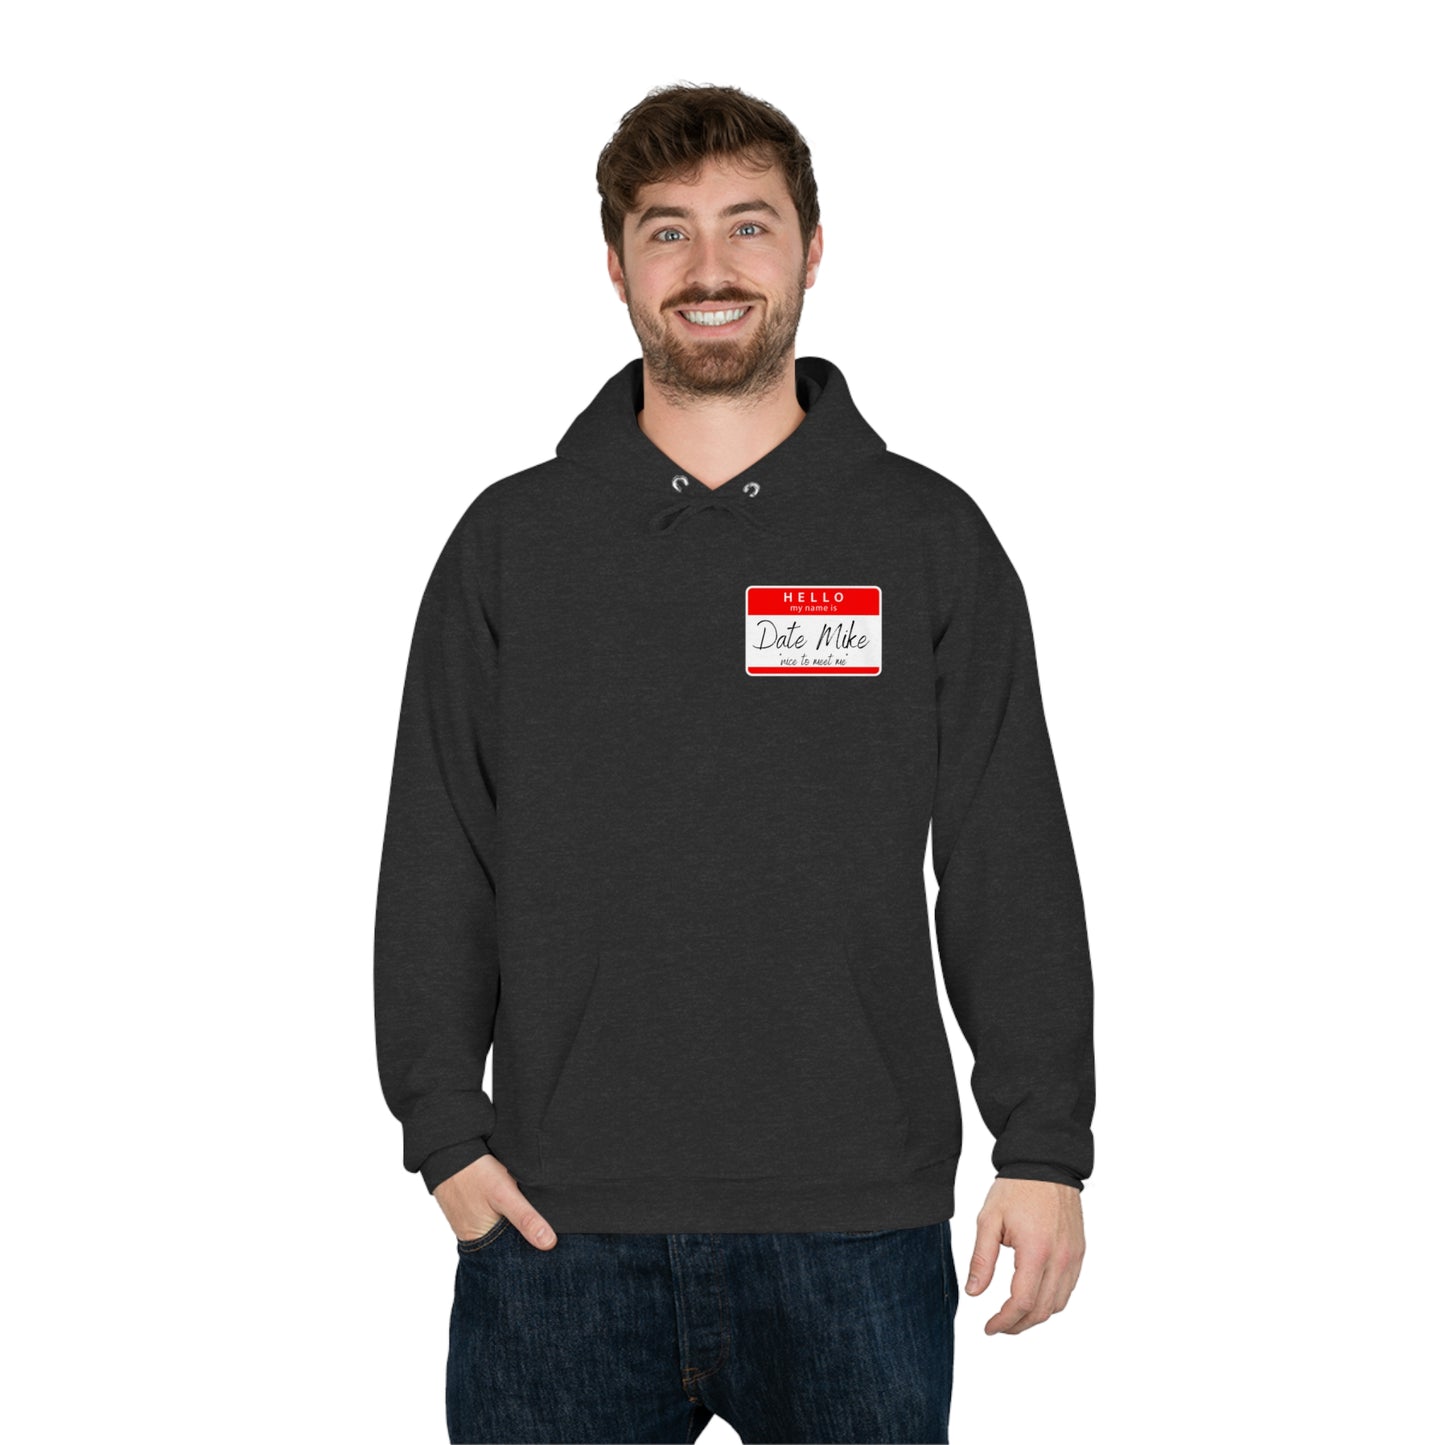 the Office "Date Mike" hoodie / Michael Scott quote / Fan of the Office hoodie gift